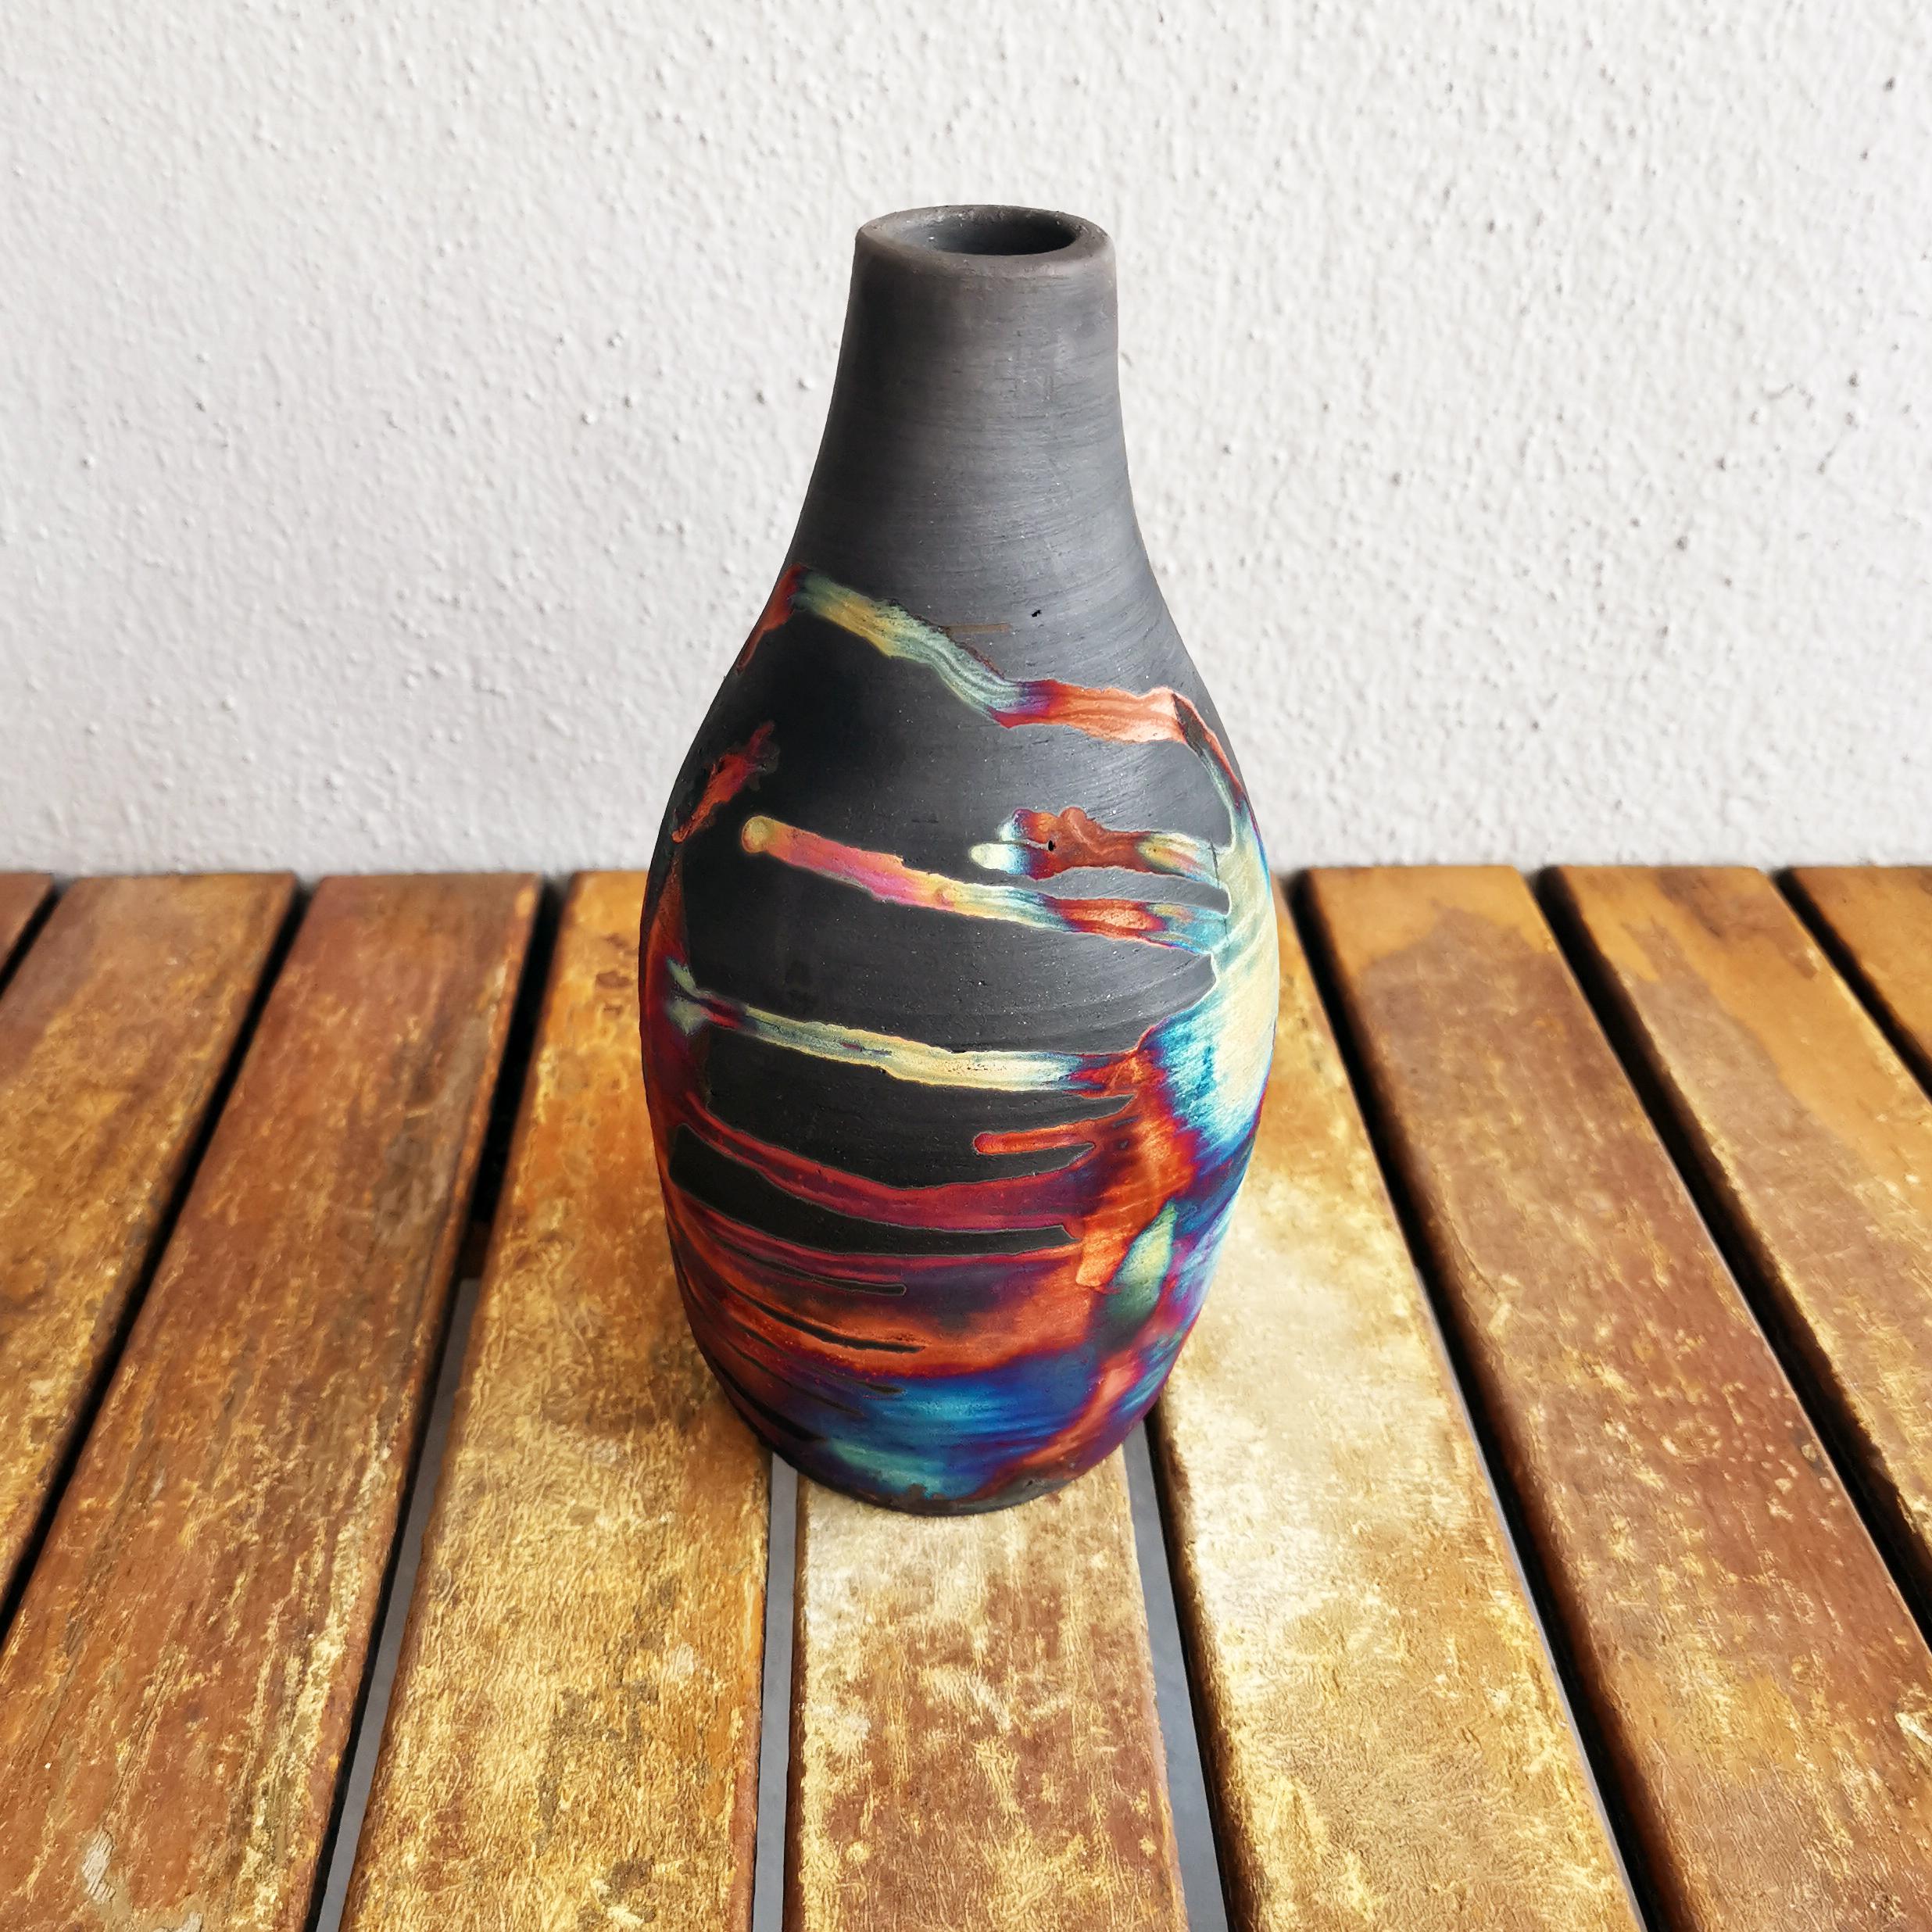 Natsu ( 夏 ) - (n) summer

Our Natsu vase is shaped almost like a soda bottle, evoking memories of summertime when it’s hot and all you would love to drink is ice-cold lemonade.

This piece would fit in very well with our Tsuri vase, Koban vase, Suzu